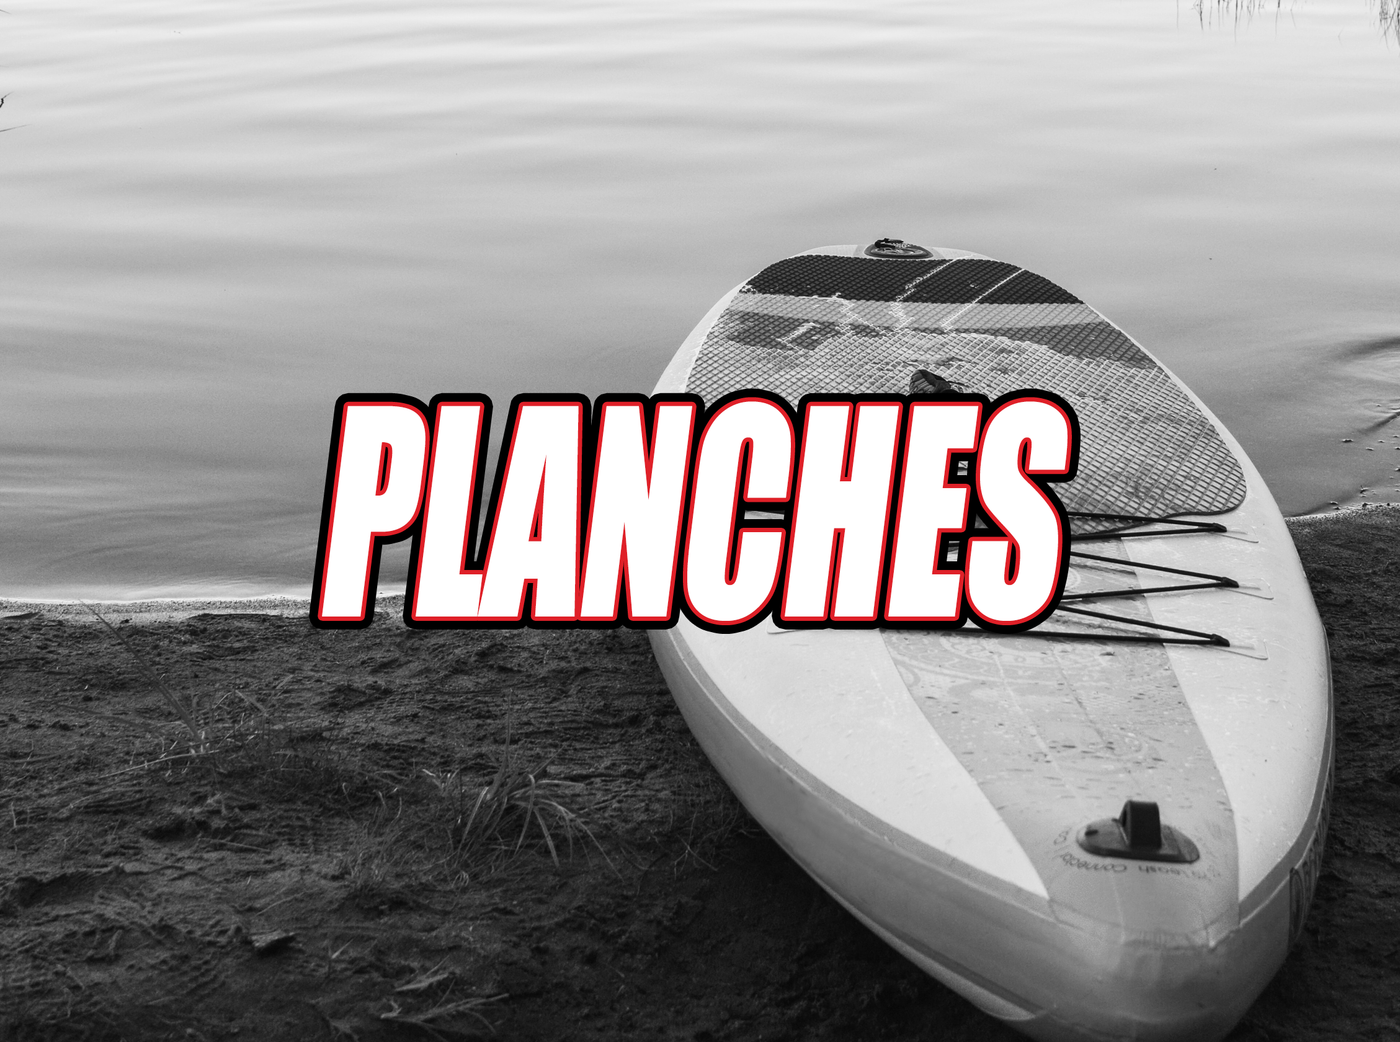 Paddleboard Planche